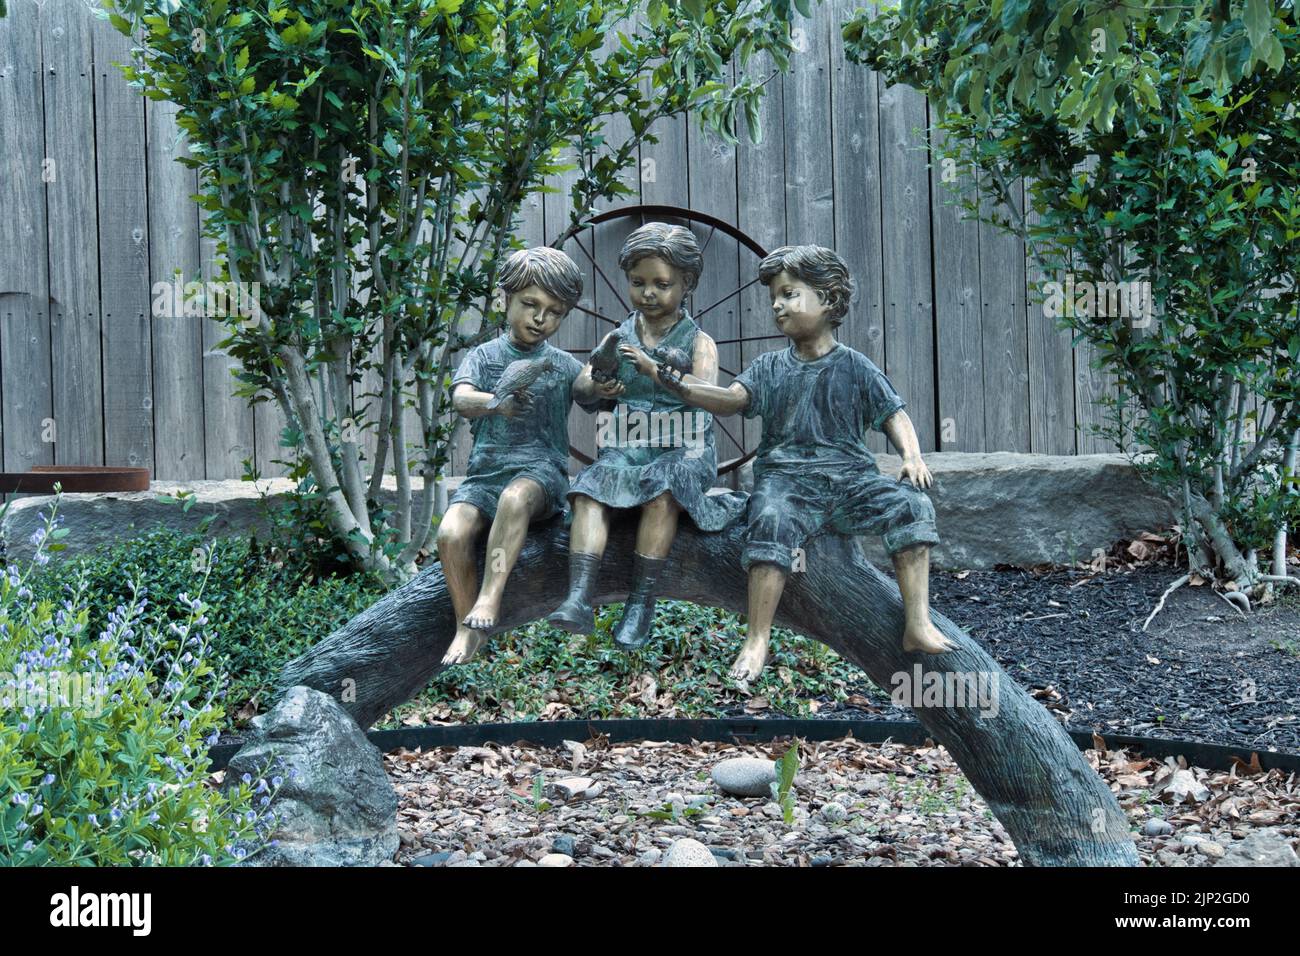 A front shot of the Three boys statue at Deanna Rose Children's Farmstead in Overland Park Kansas Stock Photo